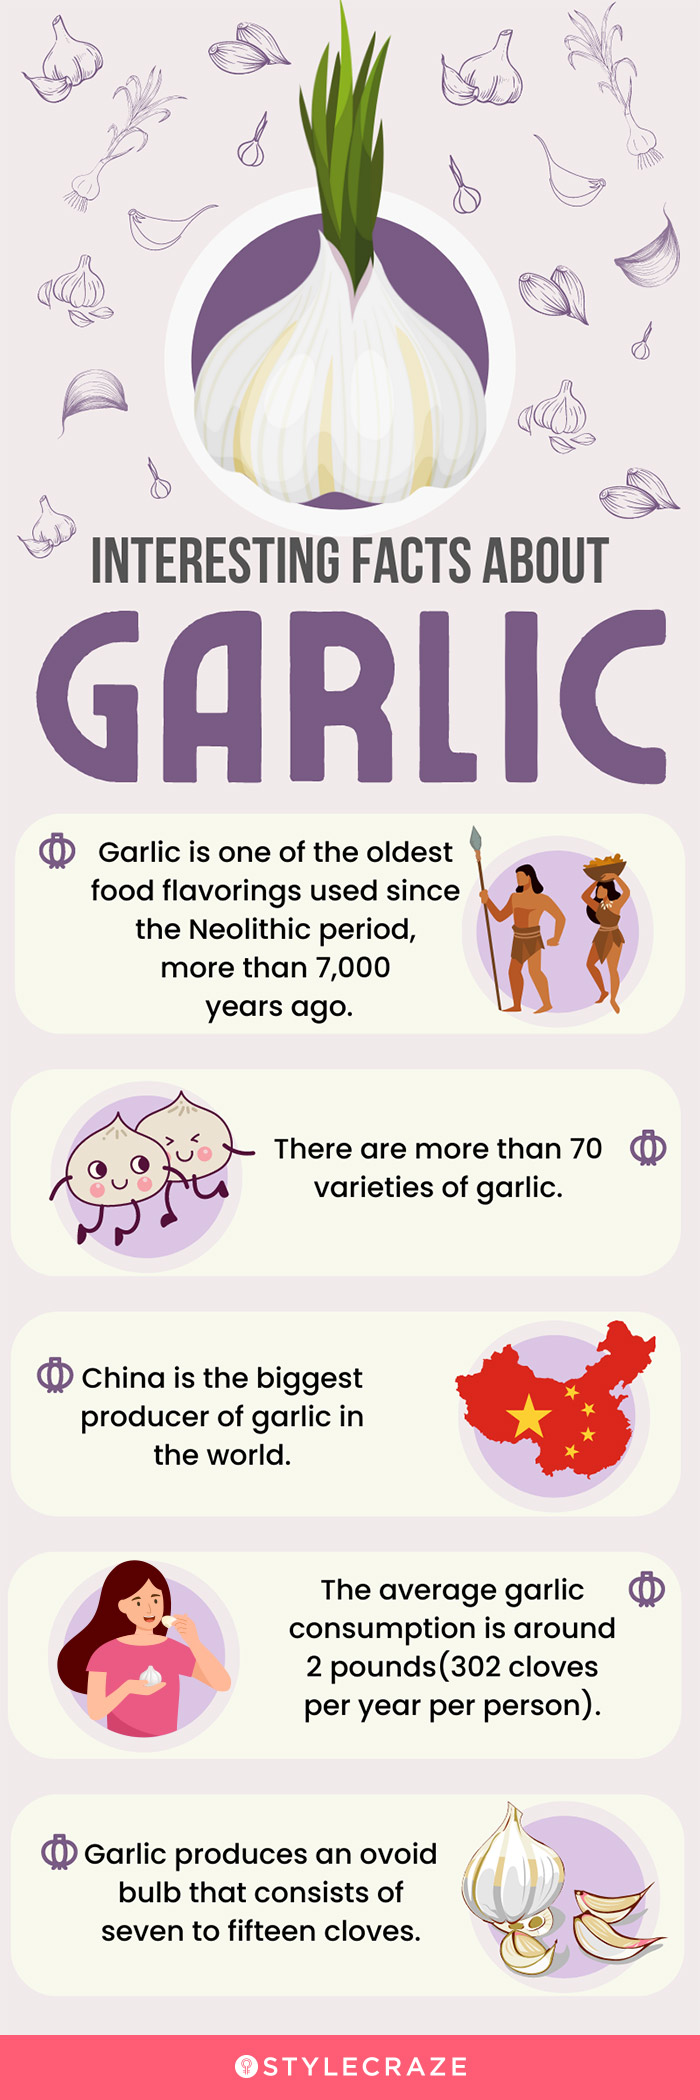 interesting facts about garlic [infographic]